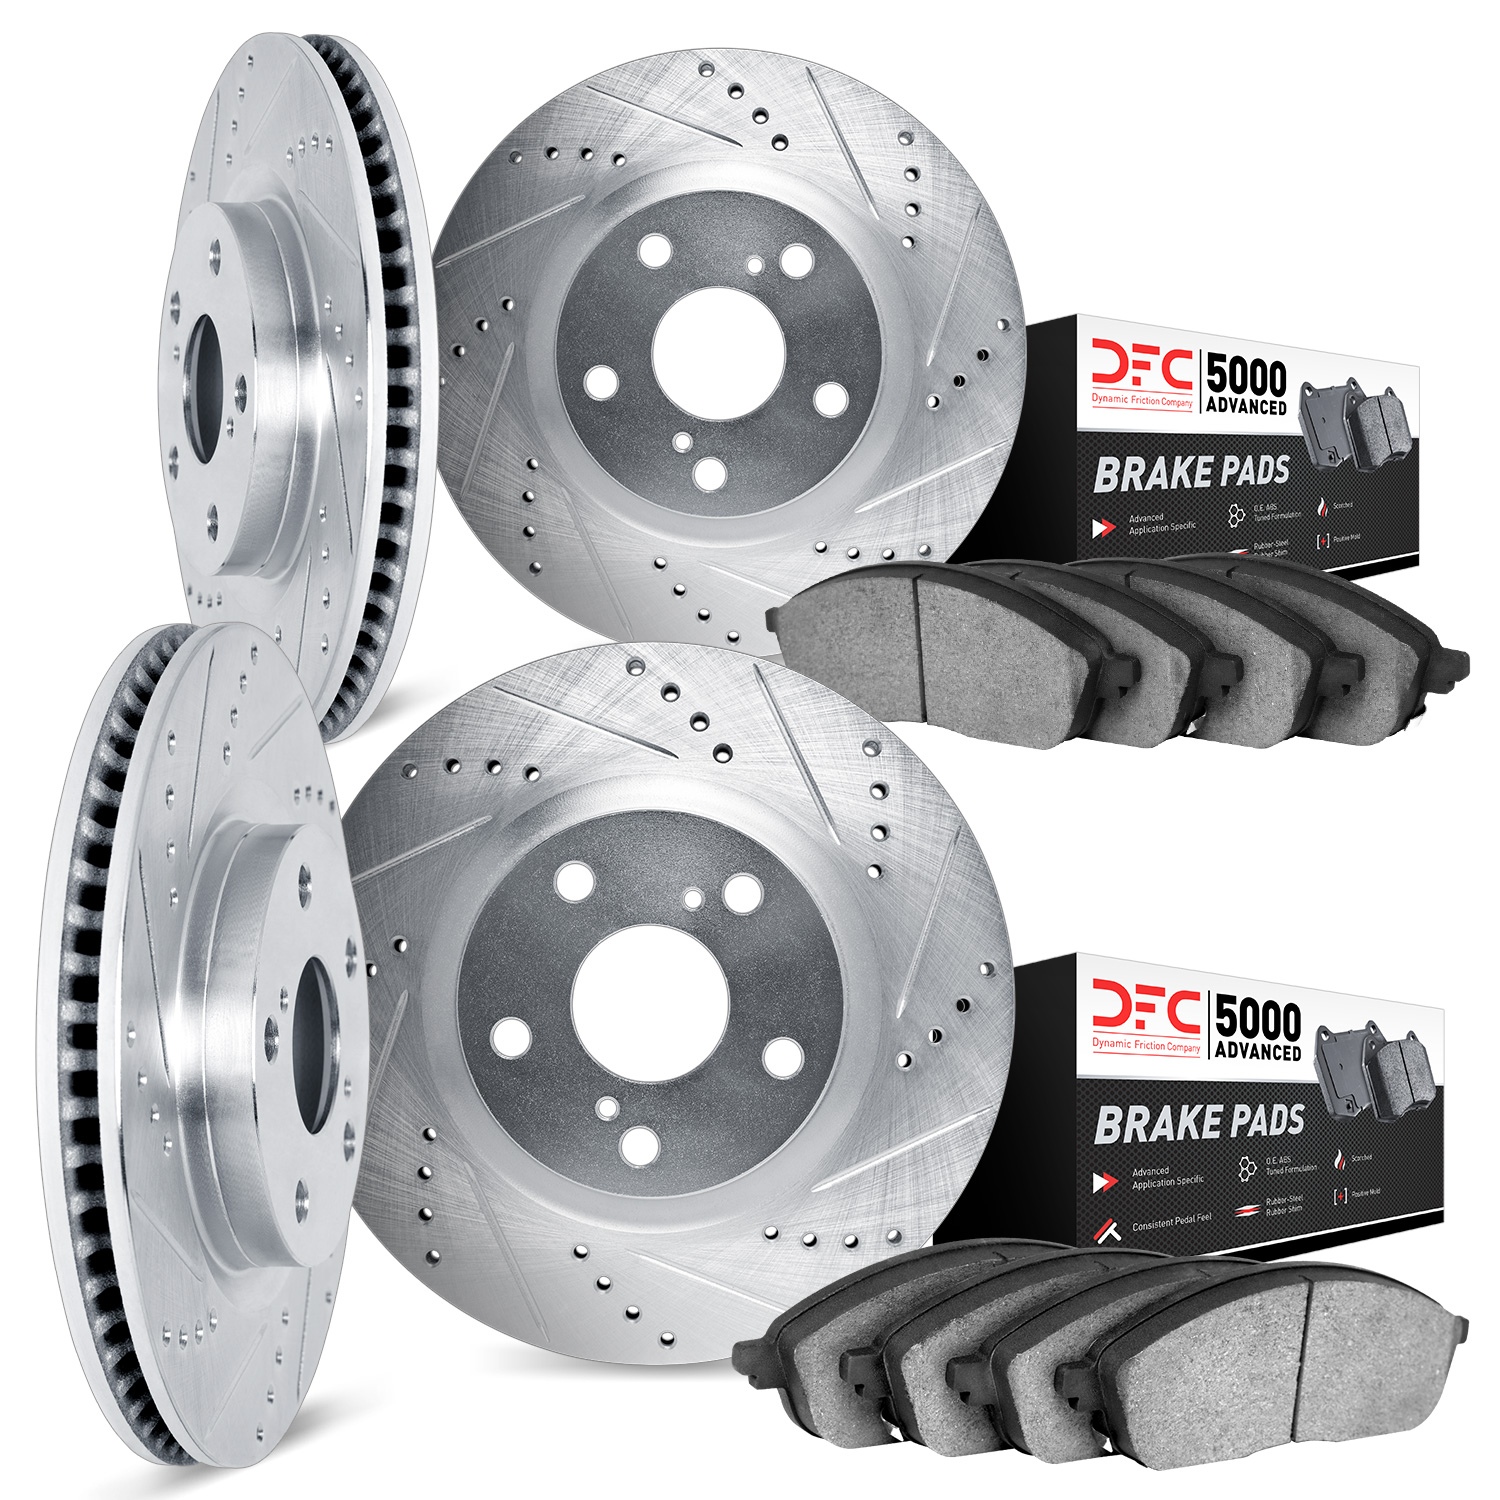 7504-68005 Drilled/Slotted Brake Rotors w/5000 Advanced Brake Pads Kit [Silver], 2003-2008 Infiniti/Nissan, Position: Front and